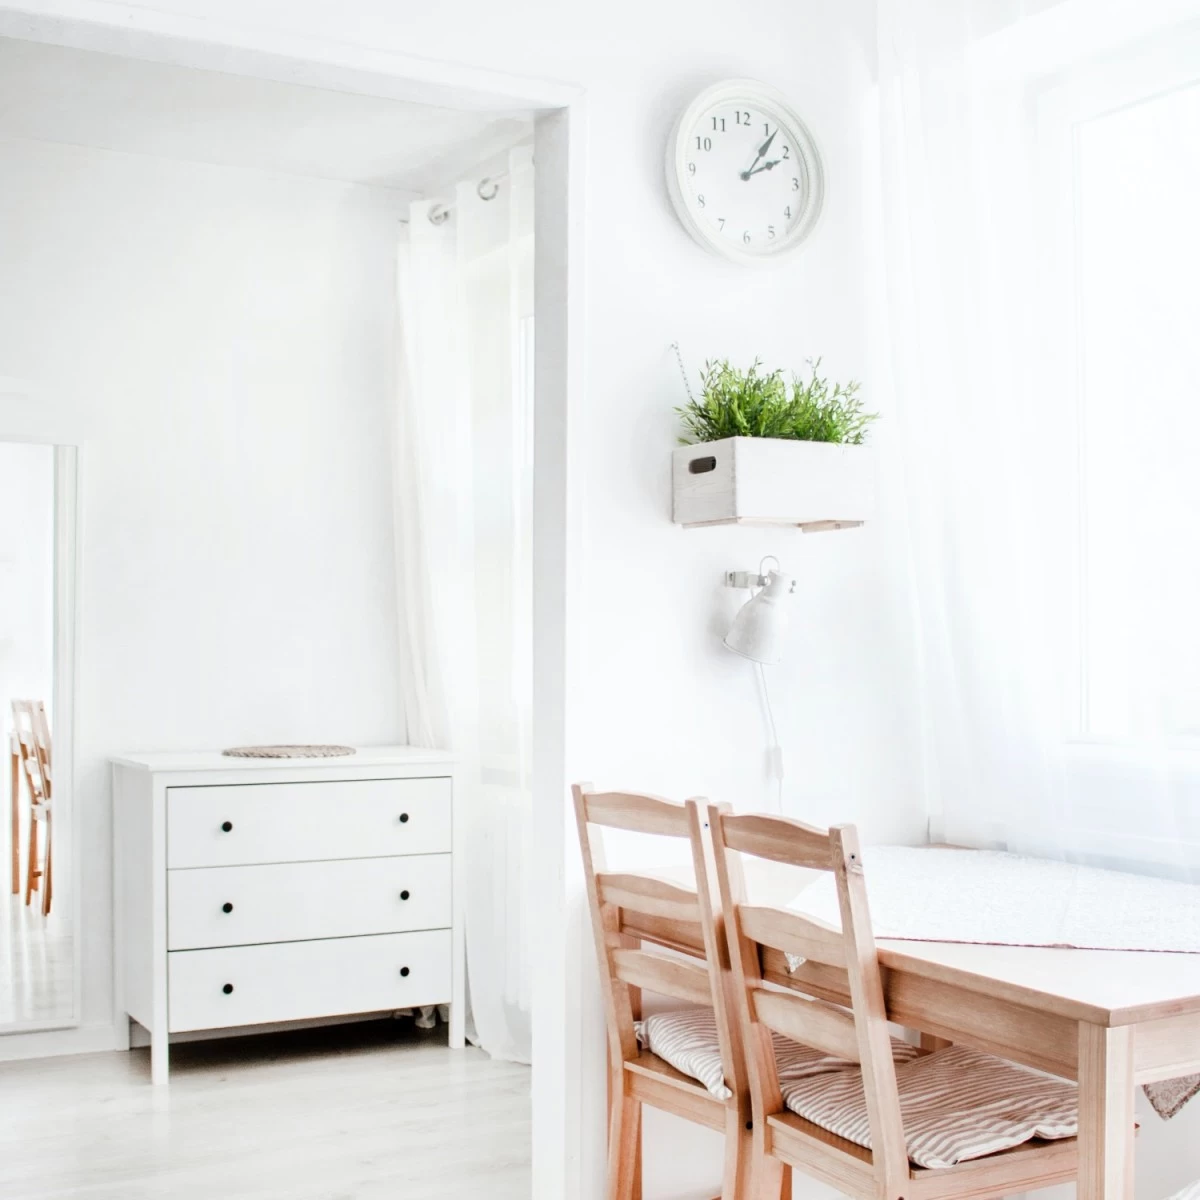 A minimalist room, with white walls and wooden floors. All of the furniture is stylish yet minimal, and there is a natural, calming energy to the space